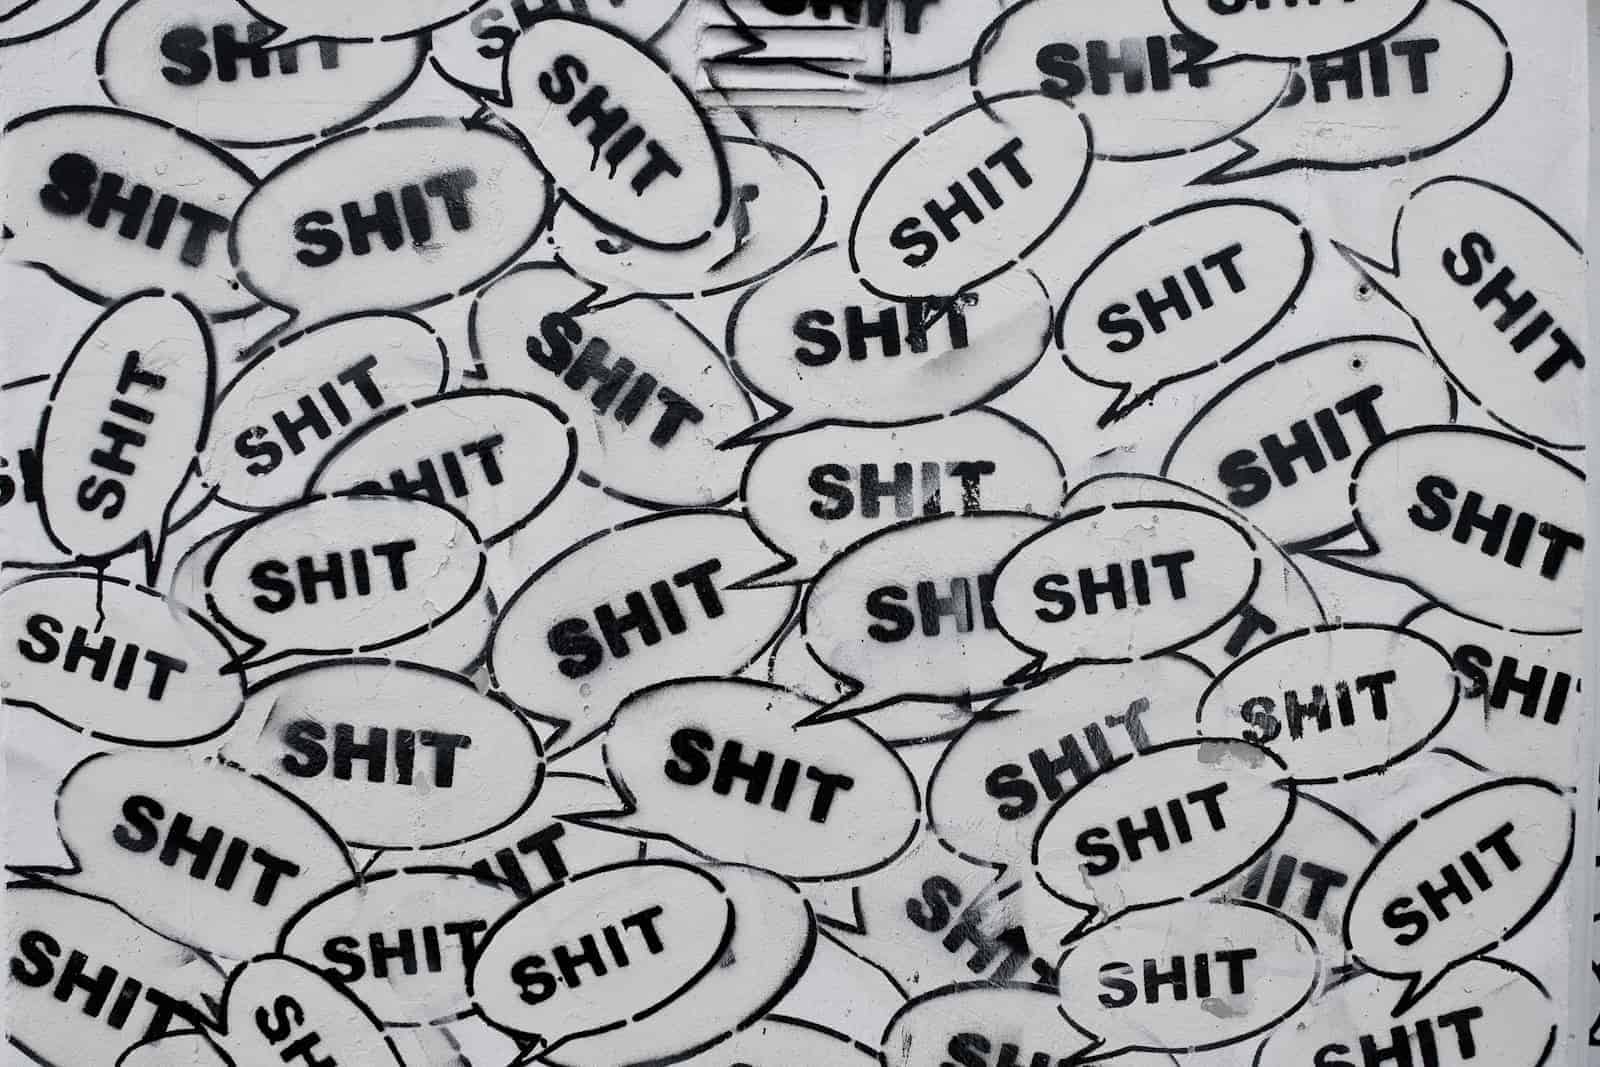 the word shit in speaking bubble repeated many times